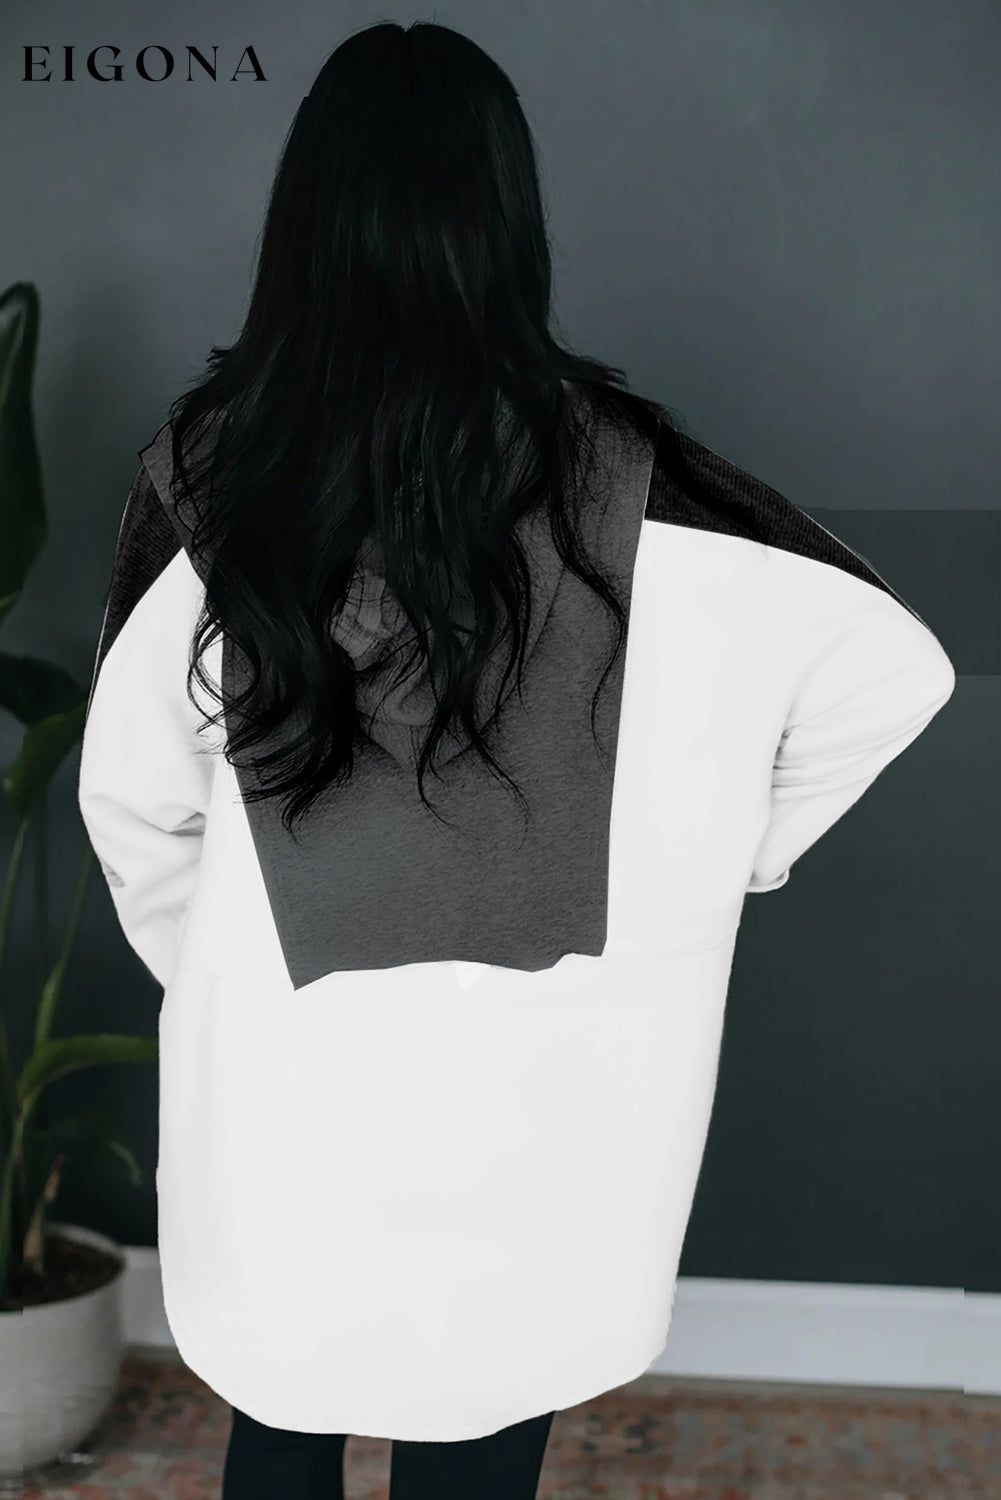 Black Color Block Exposed Seam Buttoned Neckline Hoodie Best Sellers clothes long sleeve shirt long sleeve shirts long sleeve top long sleeve tops shirt shirts top tops